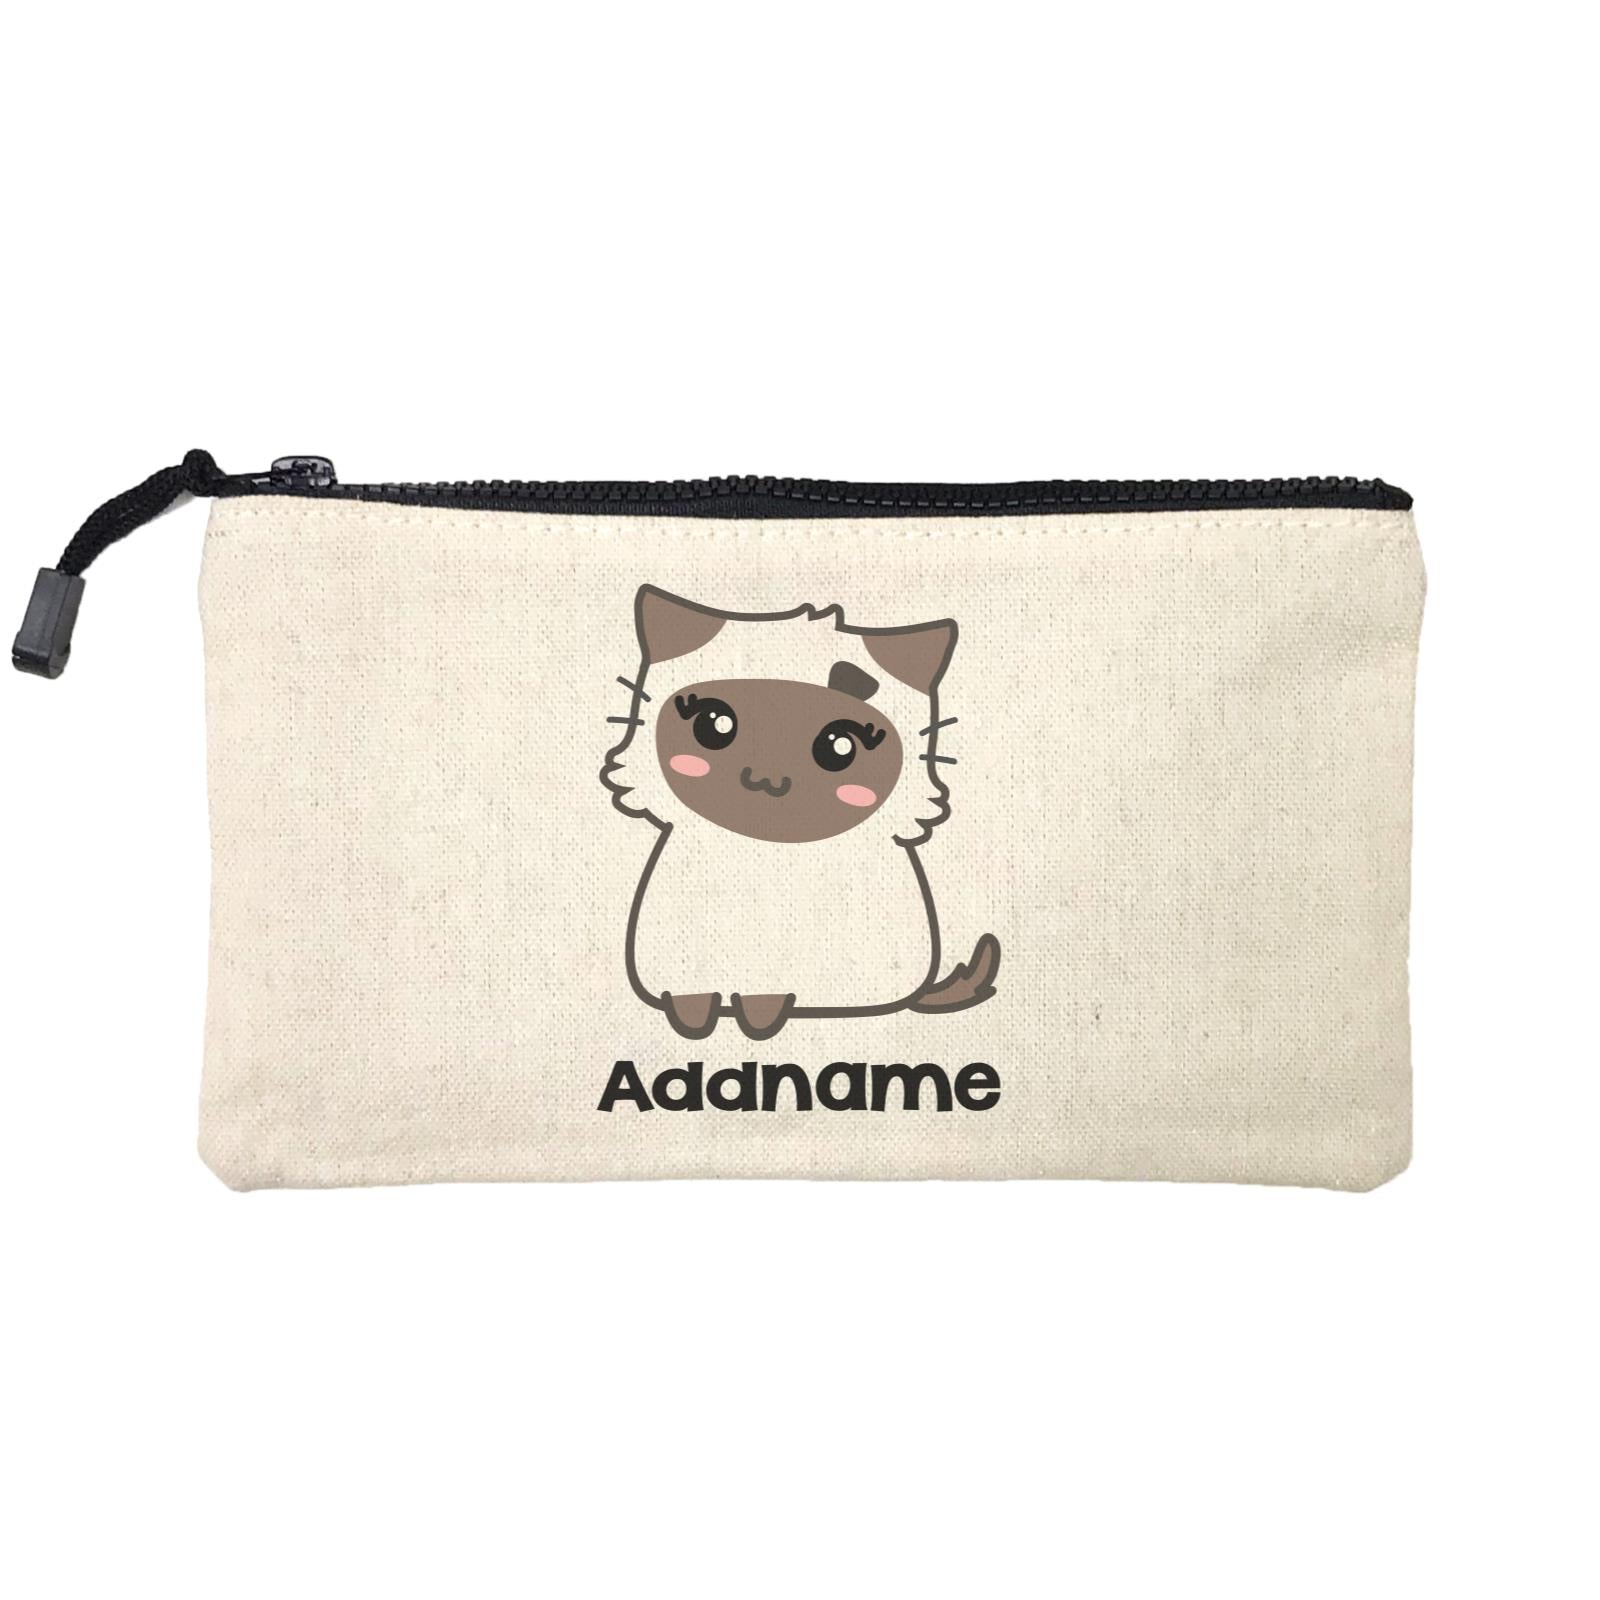 Drawn Adorable Cats White & Chocolate Addname Mini Accessories Stationery Pouch